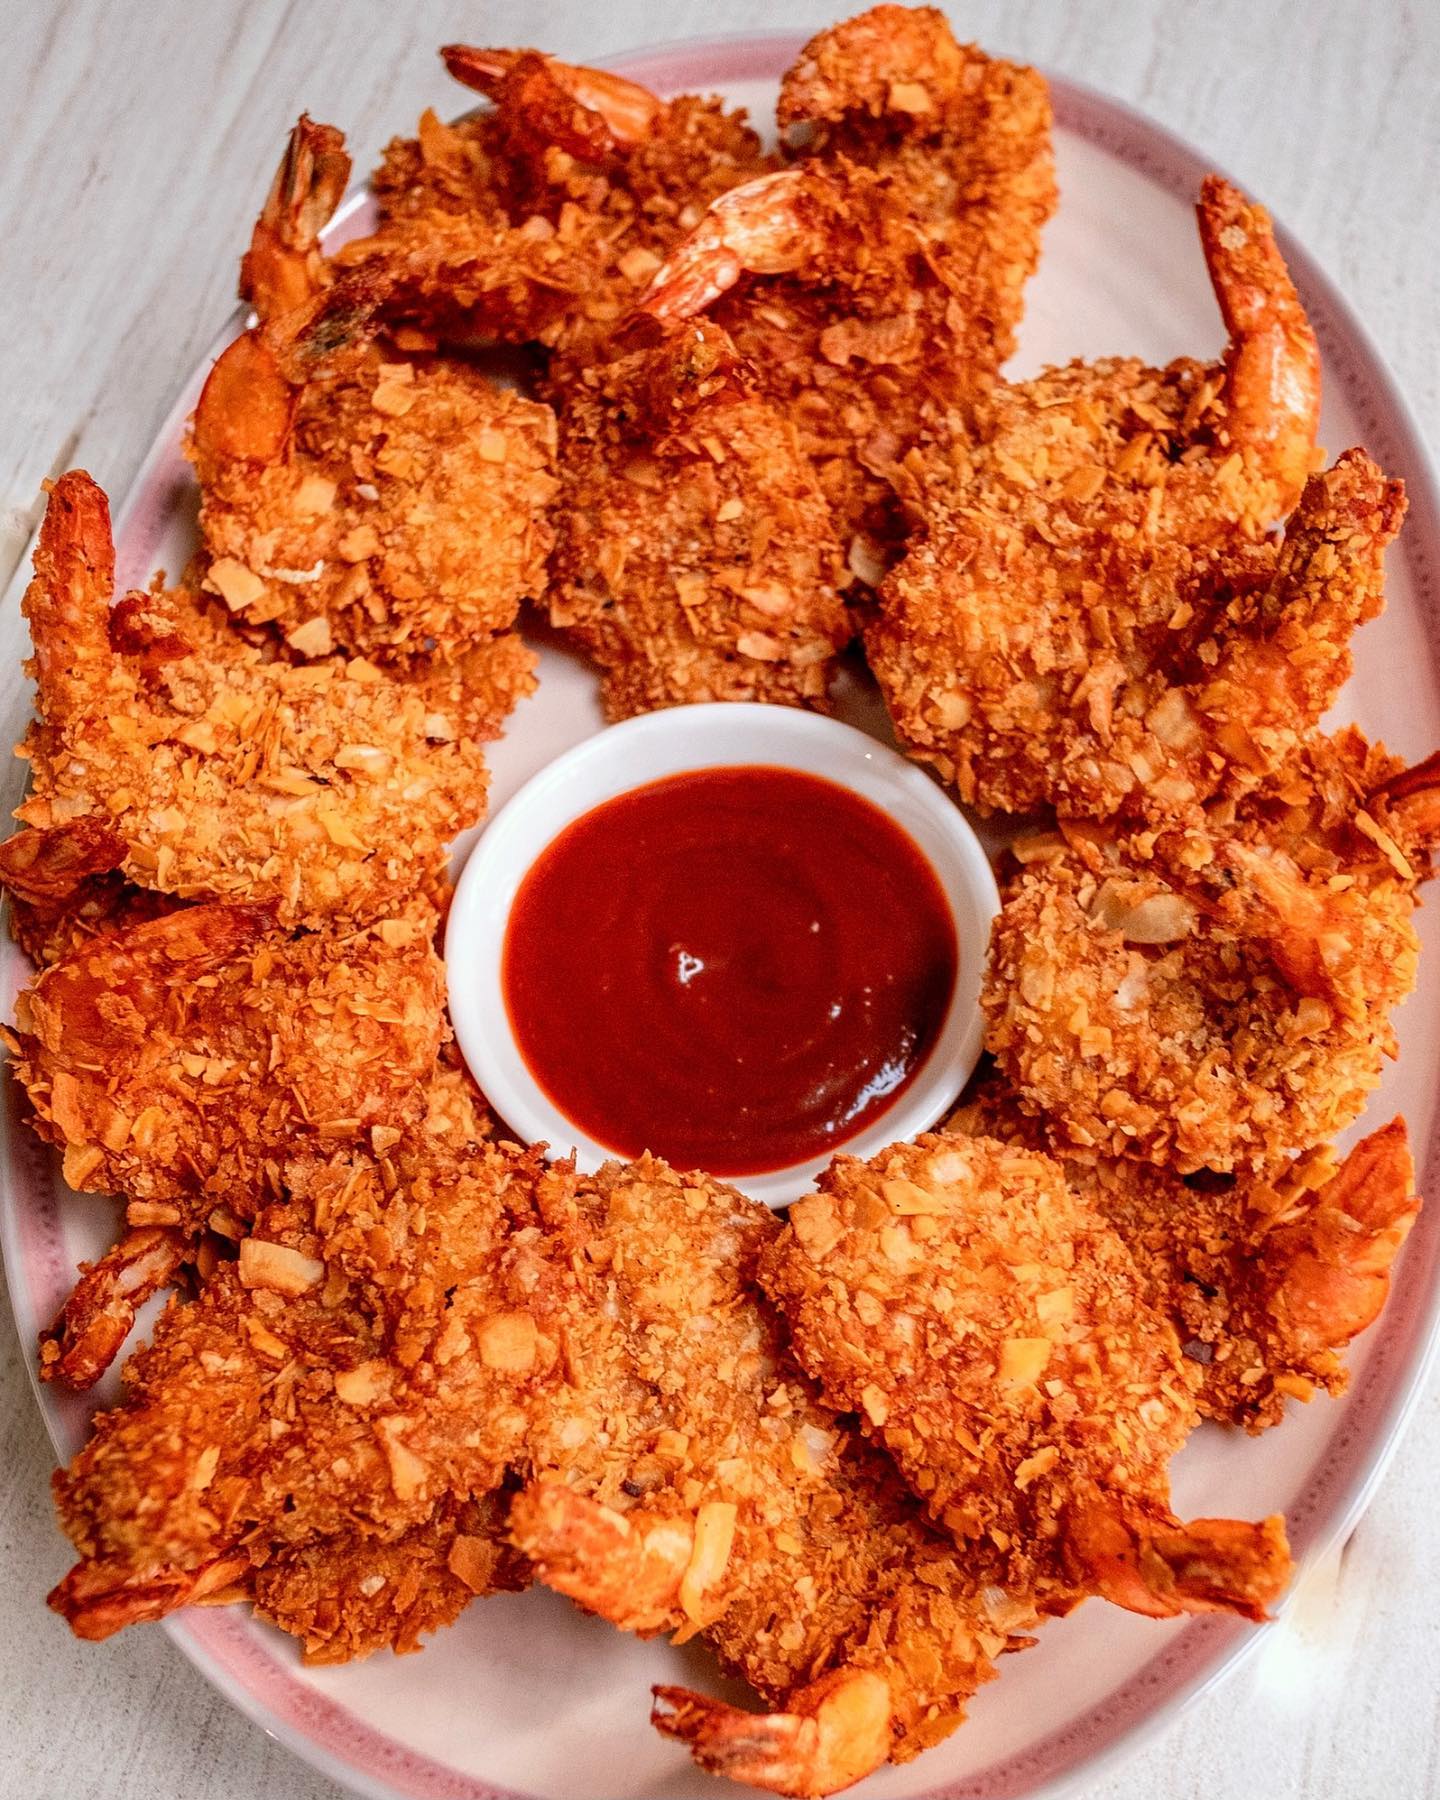 A platter of Coconut Shrimp served with a dipping sauce.